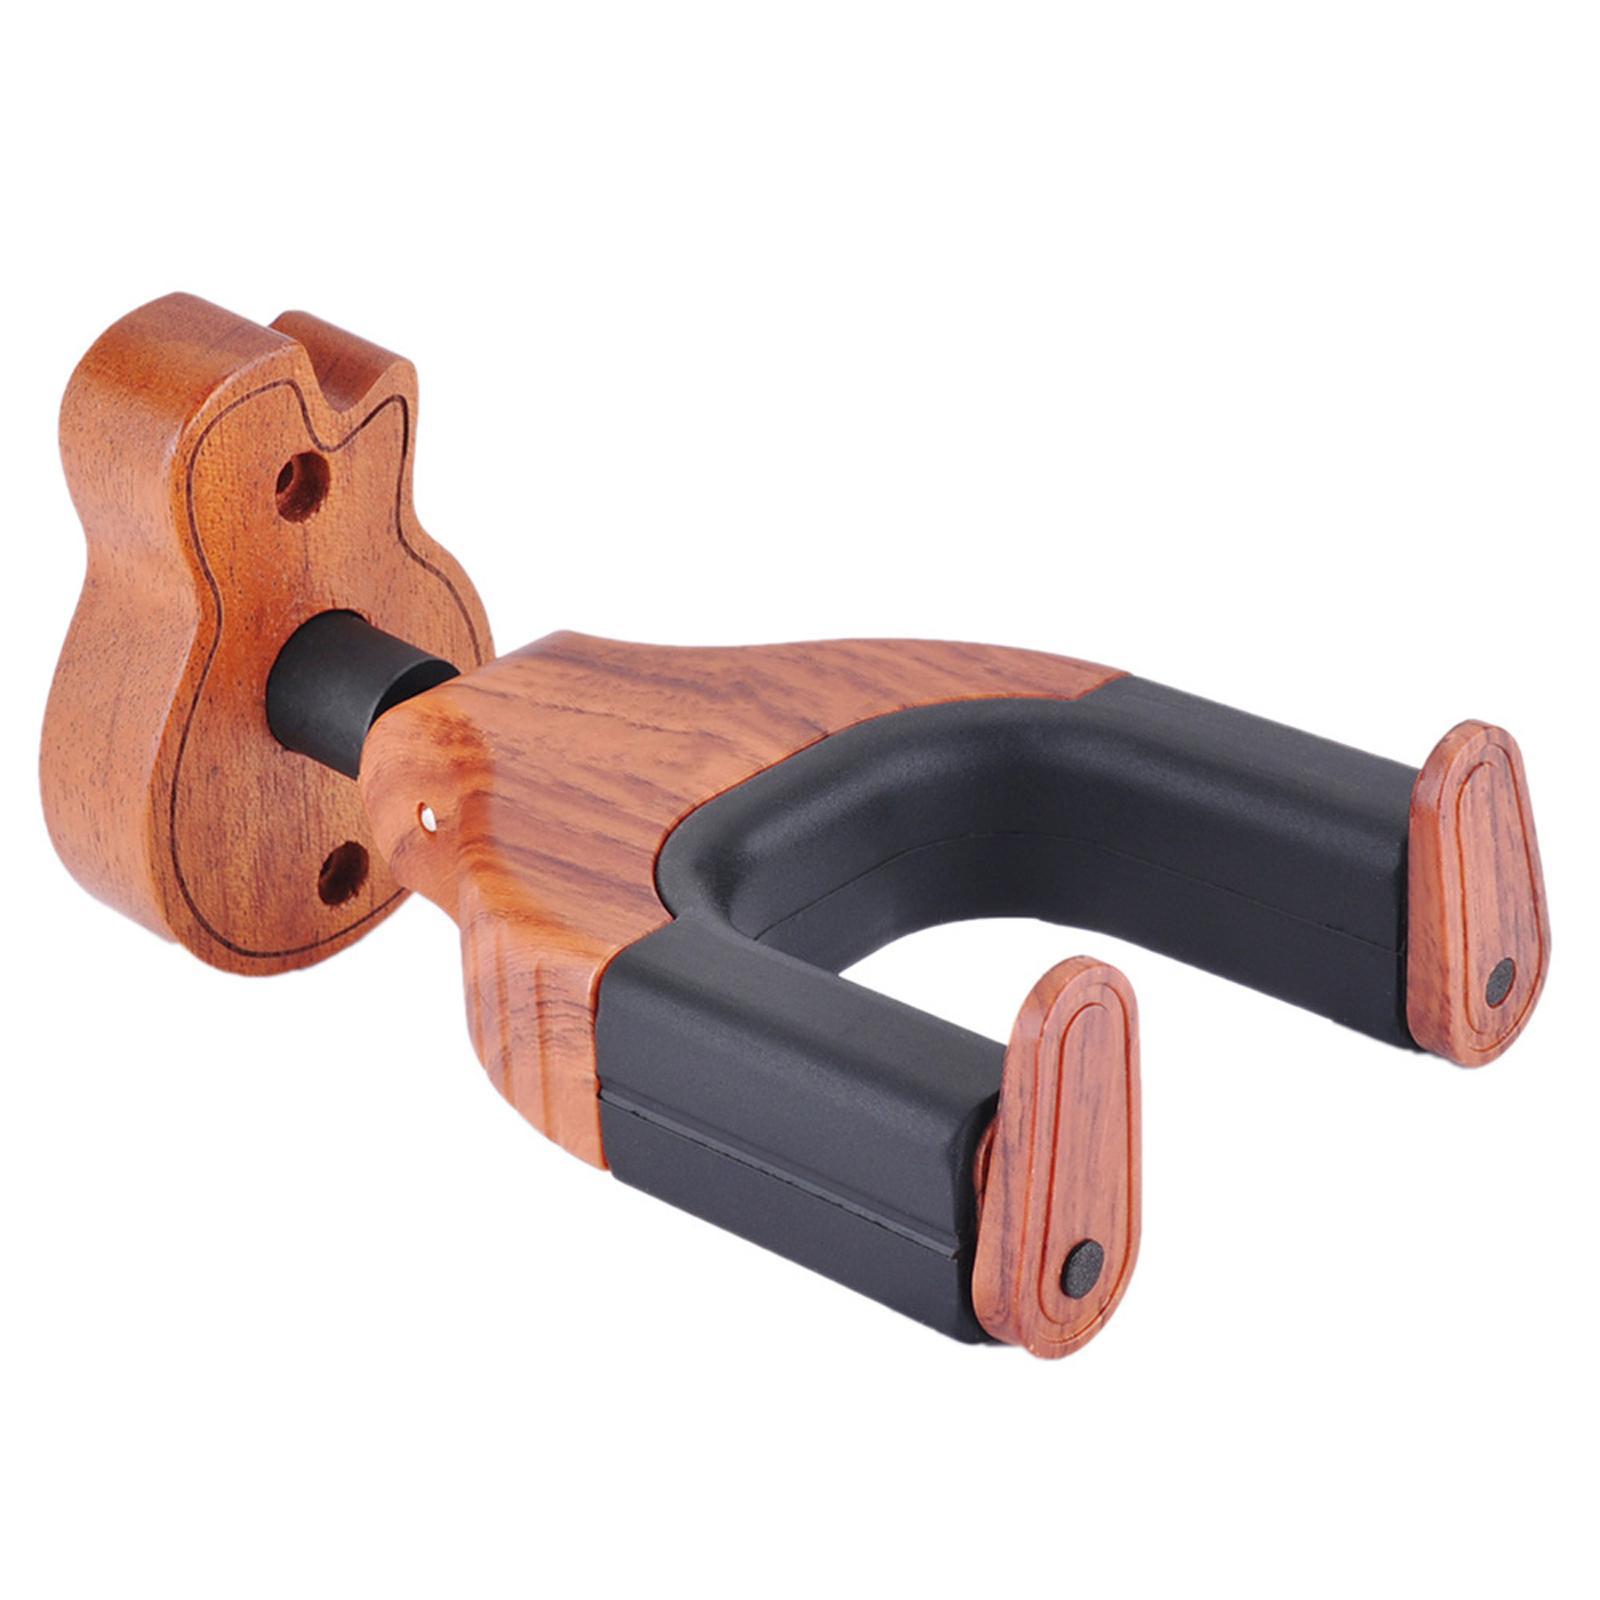 Guitar Holder, Guitar Hook, Easy to Install Guitar Support Guitar Display Professional Wood Non Slip Wall Mount Guitar Hanger, Guitar Stand